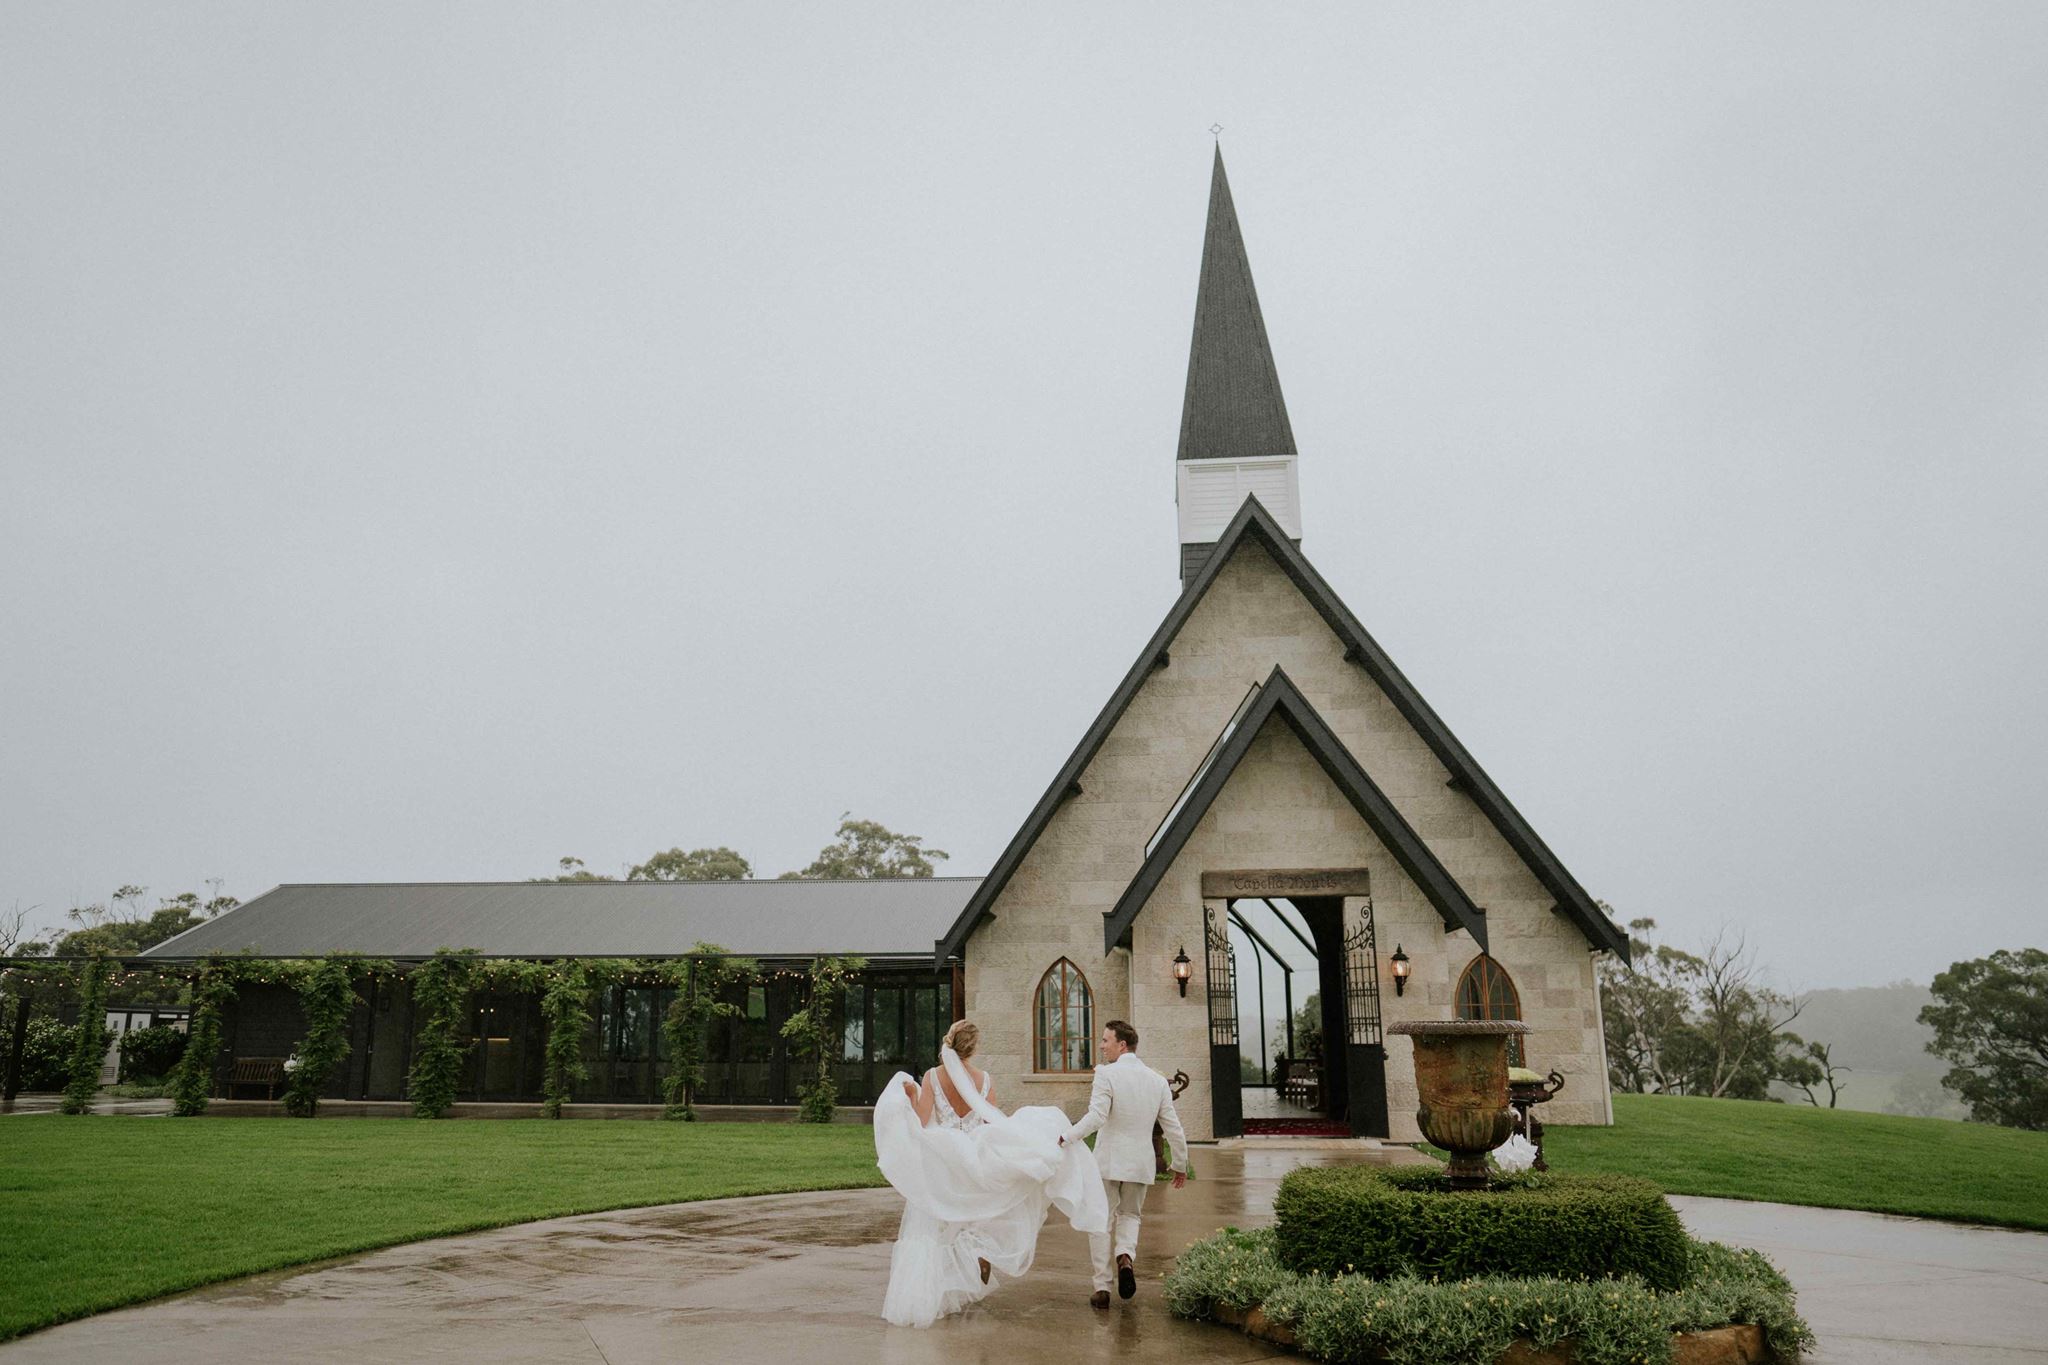 Wedding venues with chapels